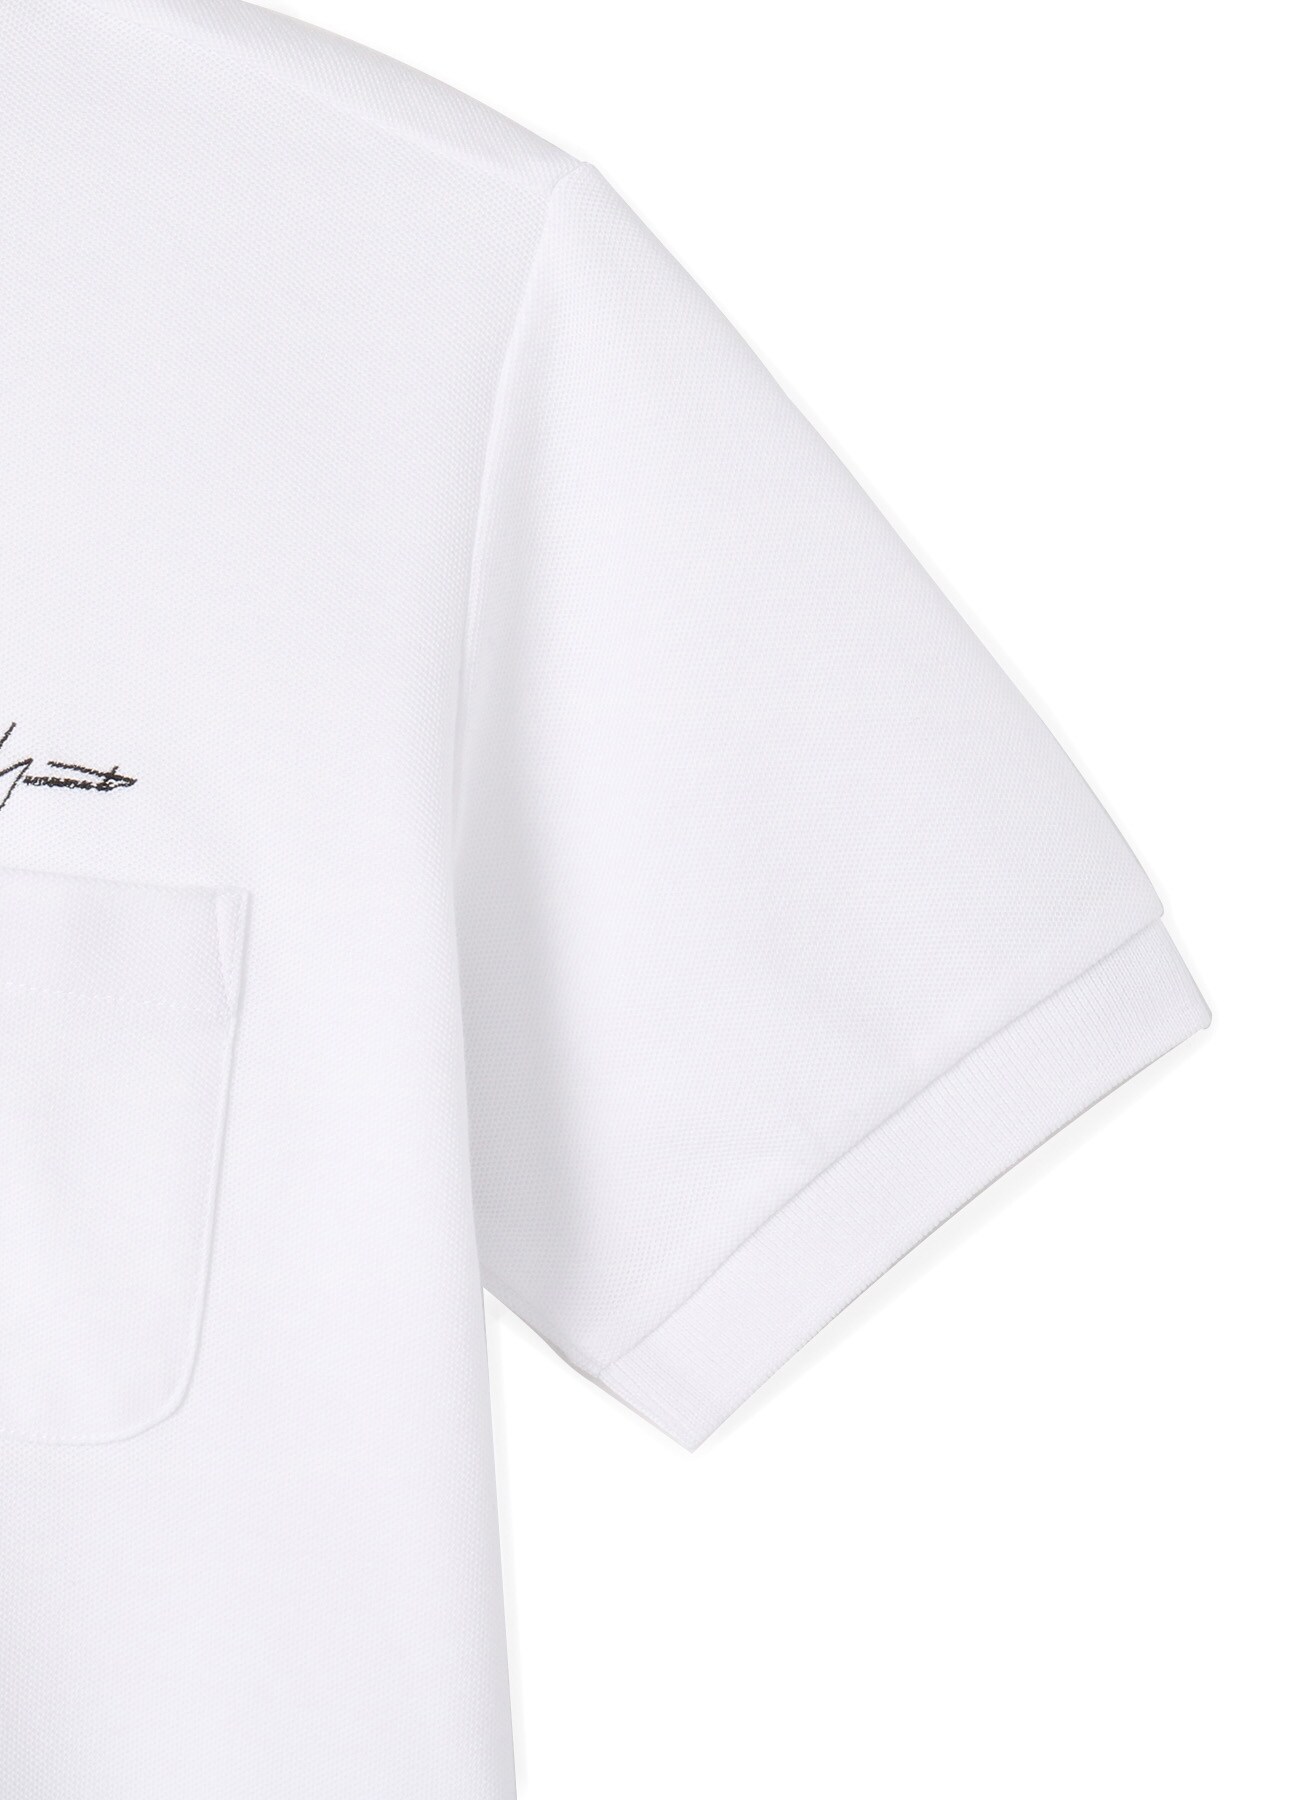 2PIECES PACK SIGNATURE EMBROIDERY POLO SHIRTS